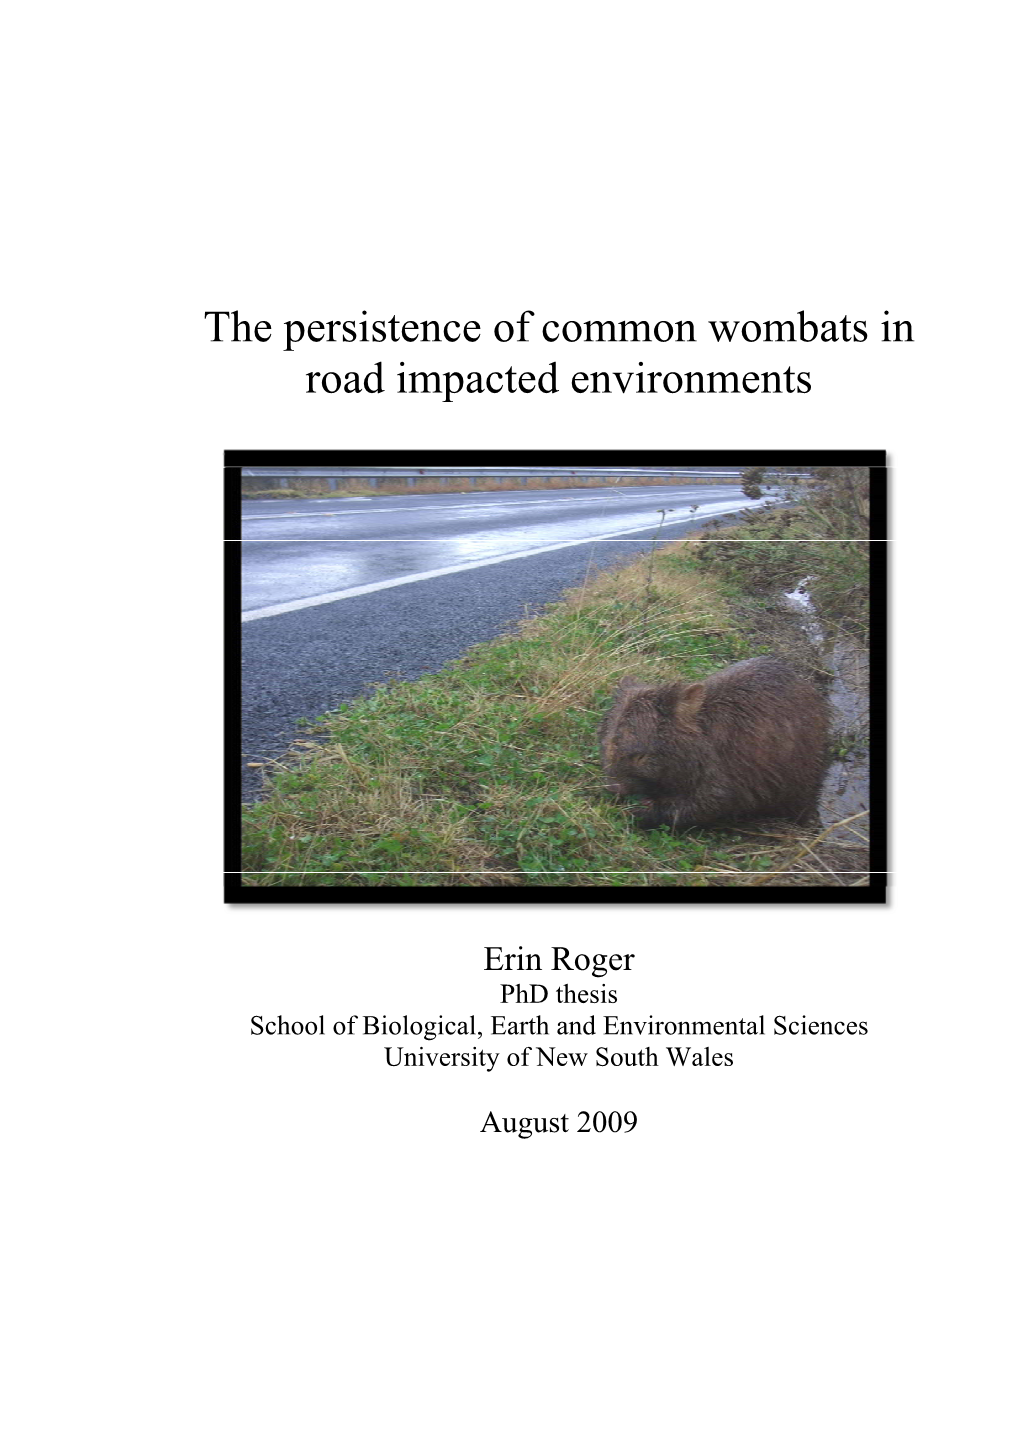 The Persistence of Common Wombats in Road Impacted Environments